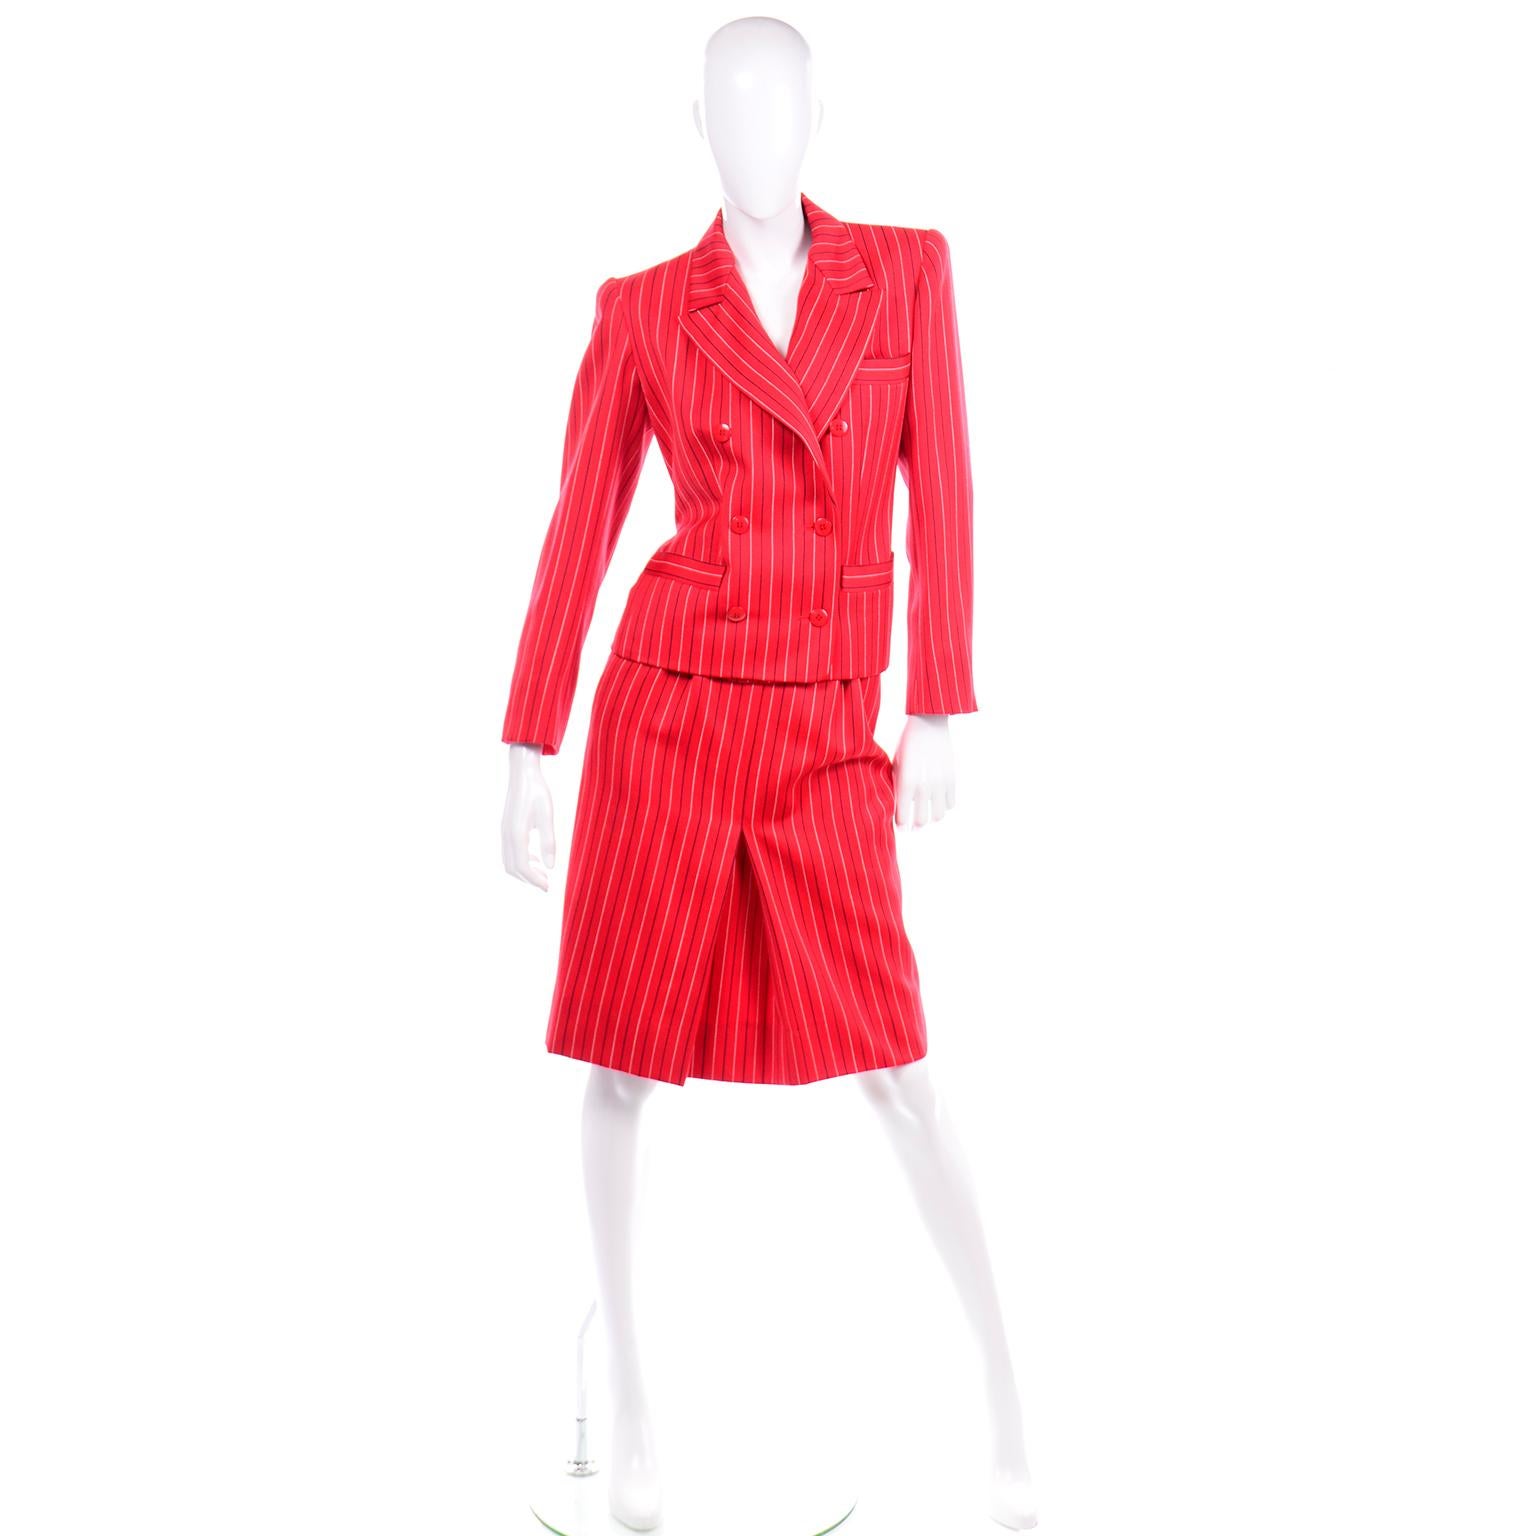 This incredible vintage red 2 piece skirt suit from Yves Saint Laurent is in excellent condition and was most likely never worn!  The lovely red fine wool fabric has Navy and white pinstripes.  The blazer / jacket is double breasted with shoulder